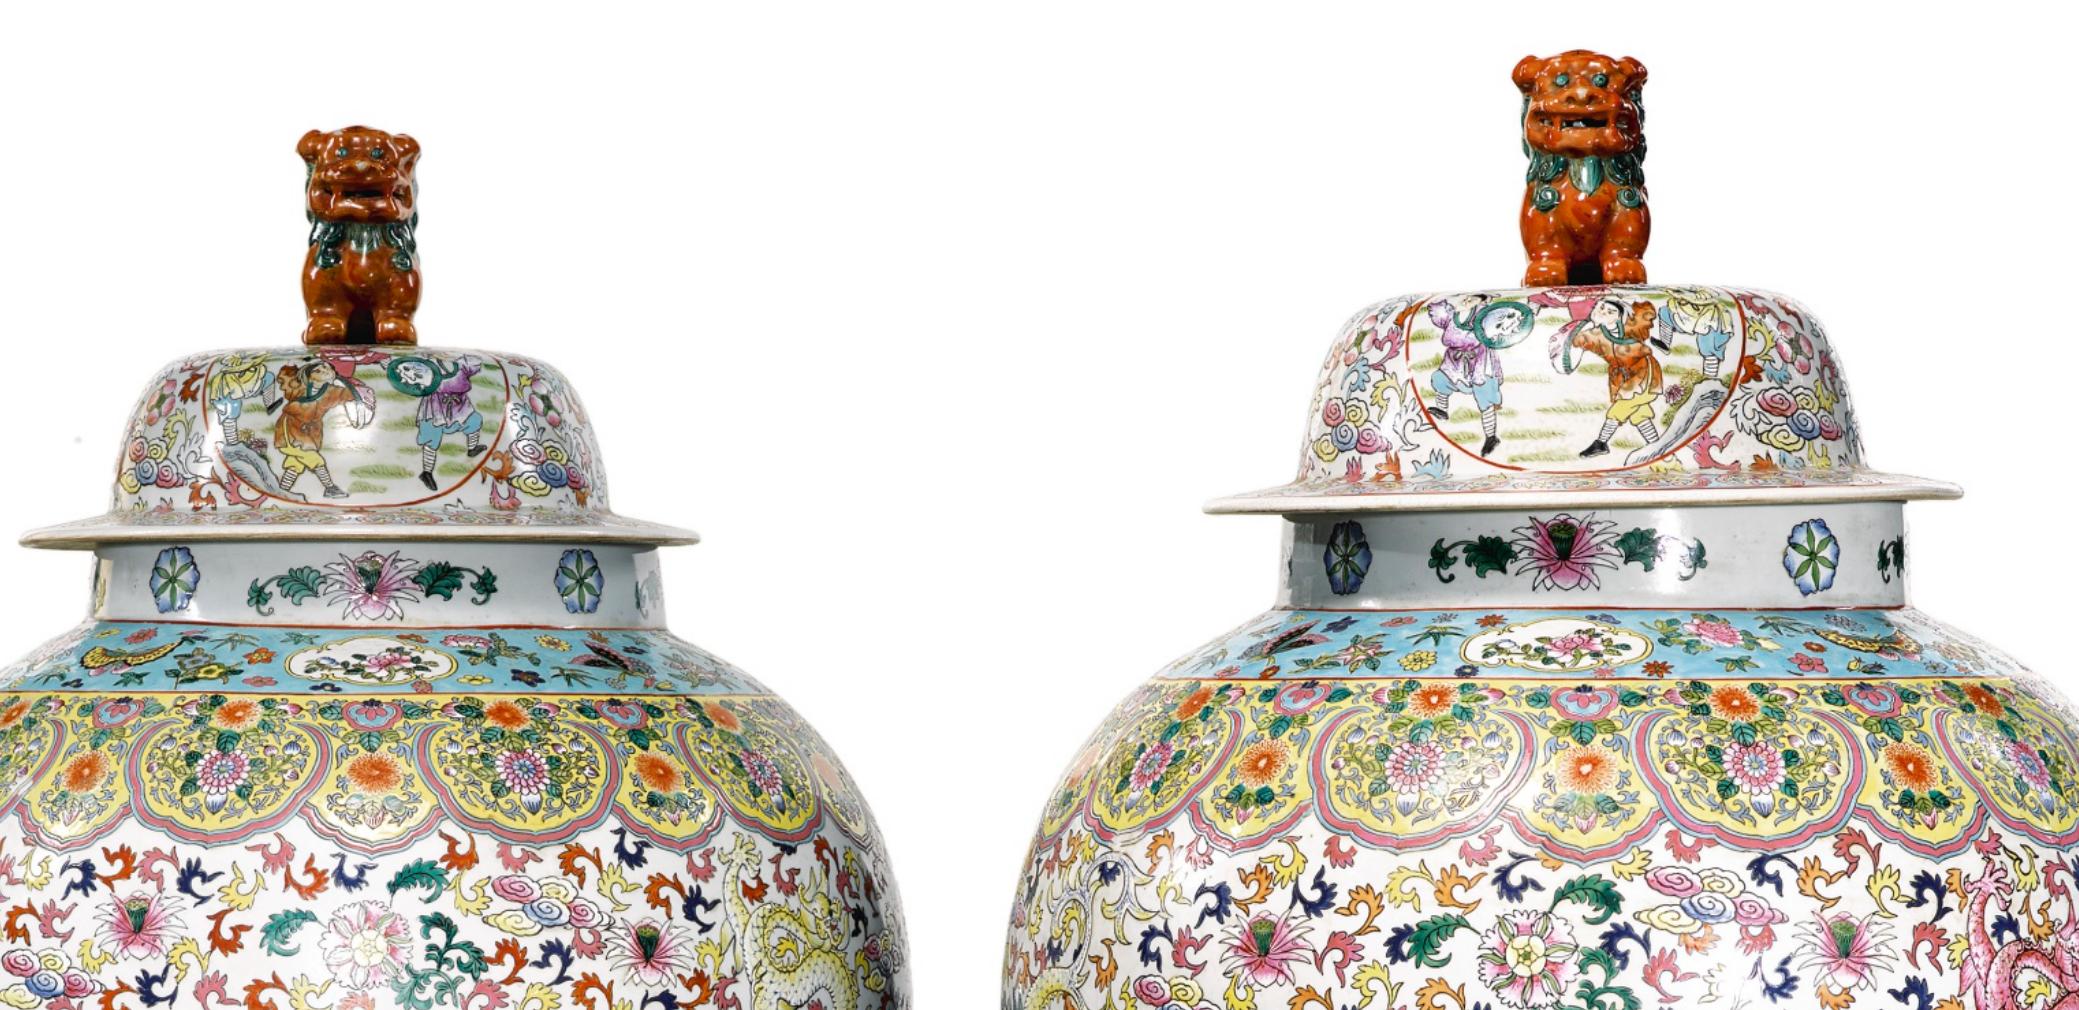 A massive pair of Chinese famille rose porcelain baluster vases or jars and covers
circa early 20th century 

Painted with battle scenes, dragons, and flowers with fu dog finials.
bases bearing apocryphal four-character Tongzhi